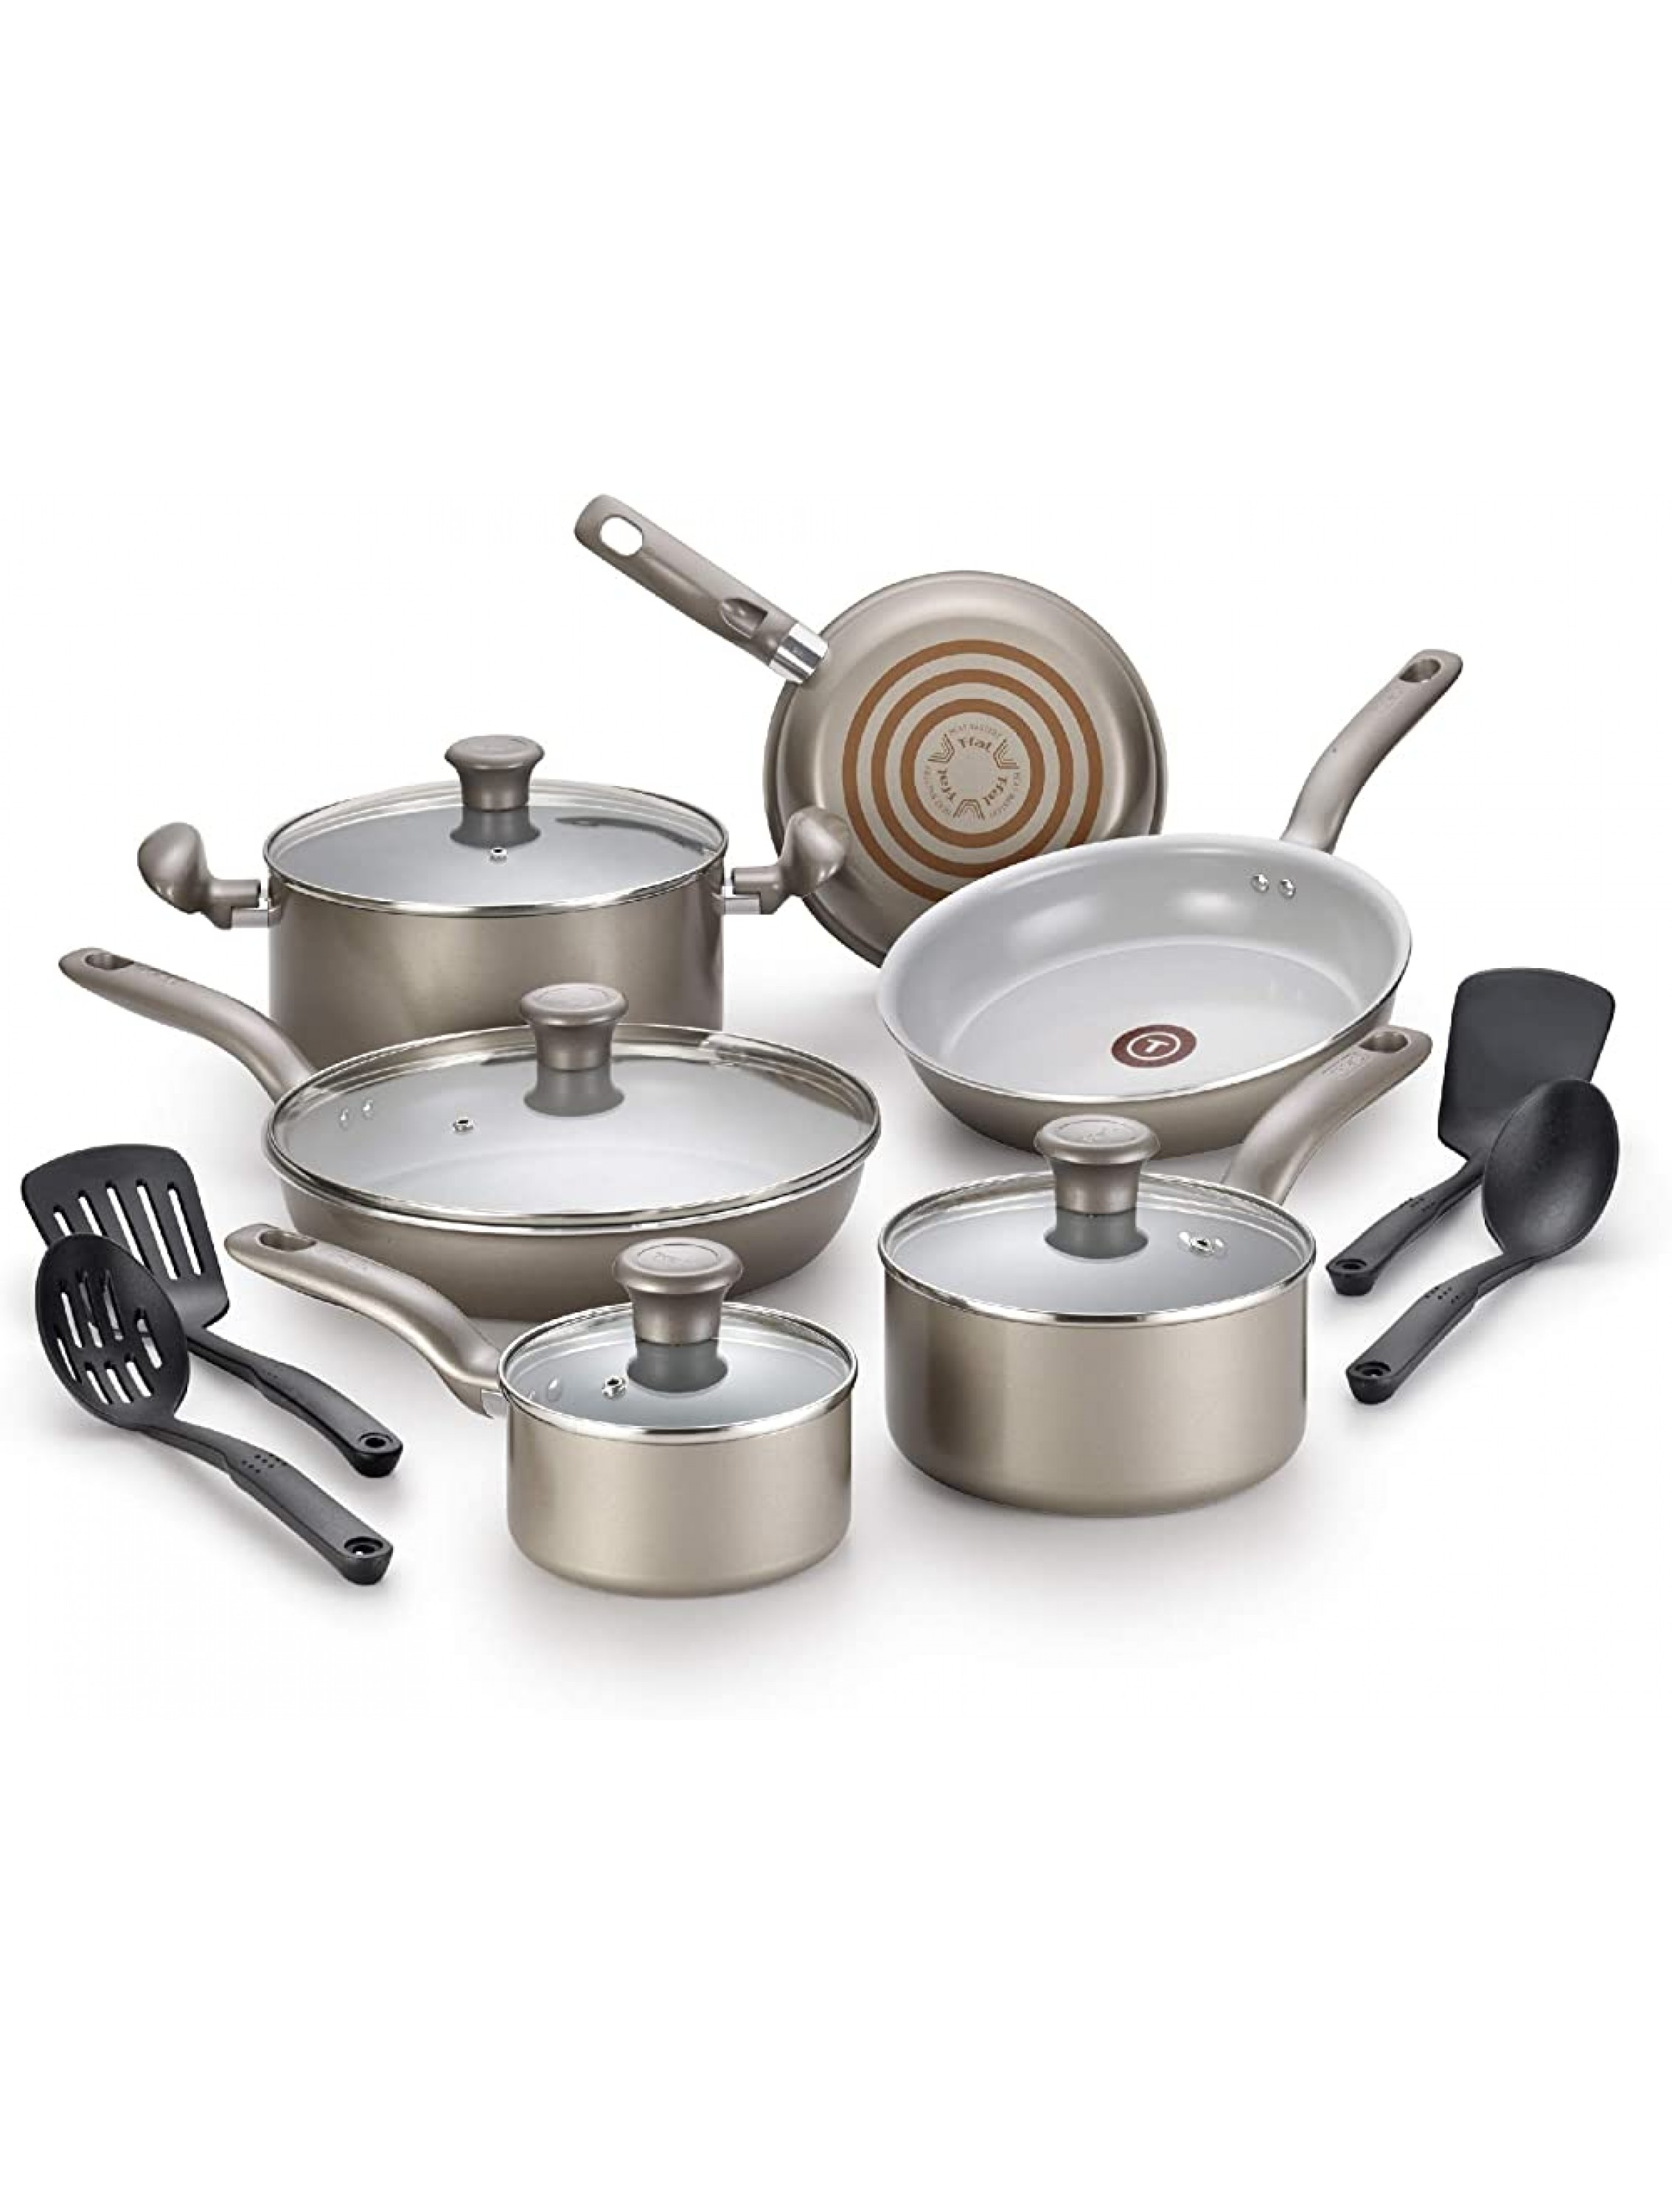 T-fal G919SE64 Initiatives Ceramic Nonstick Dishwasher Safe Toxic Free 14-Piece Cookware Set Gold - BXA8M3AY1